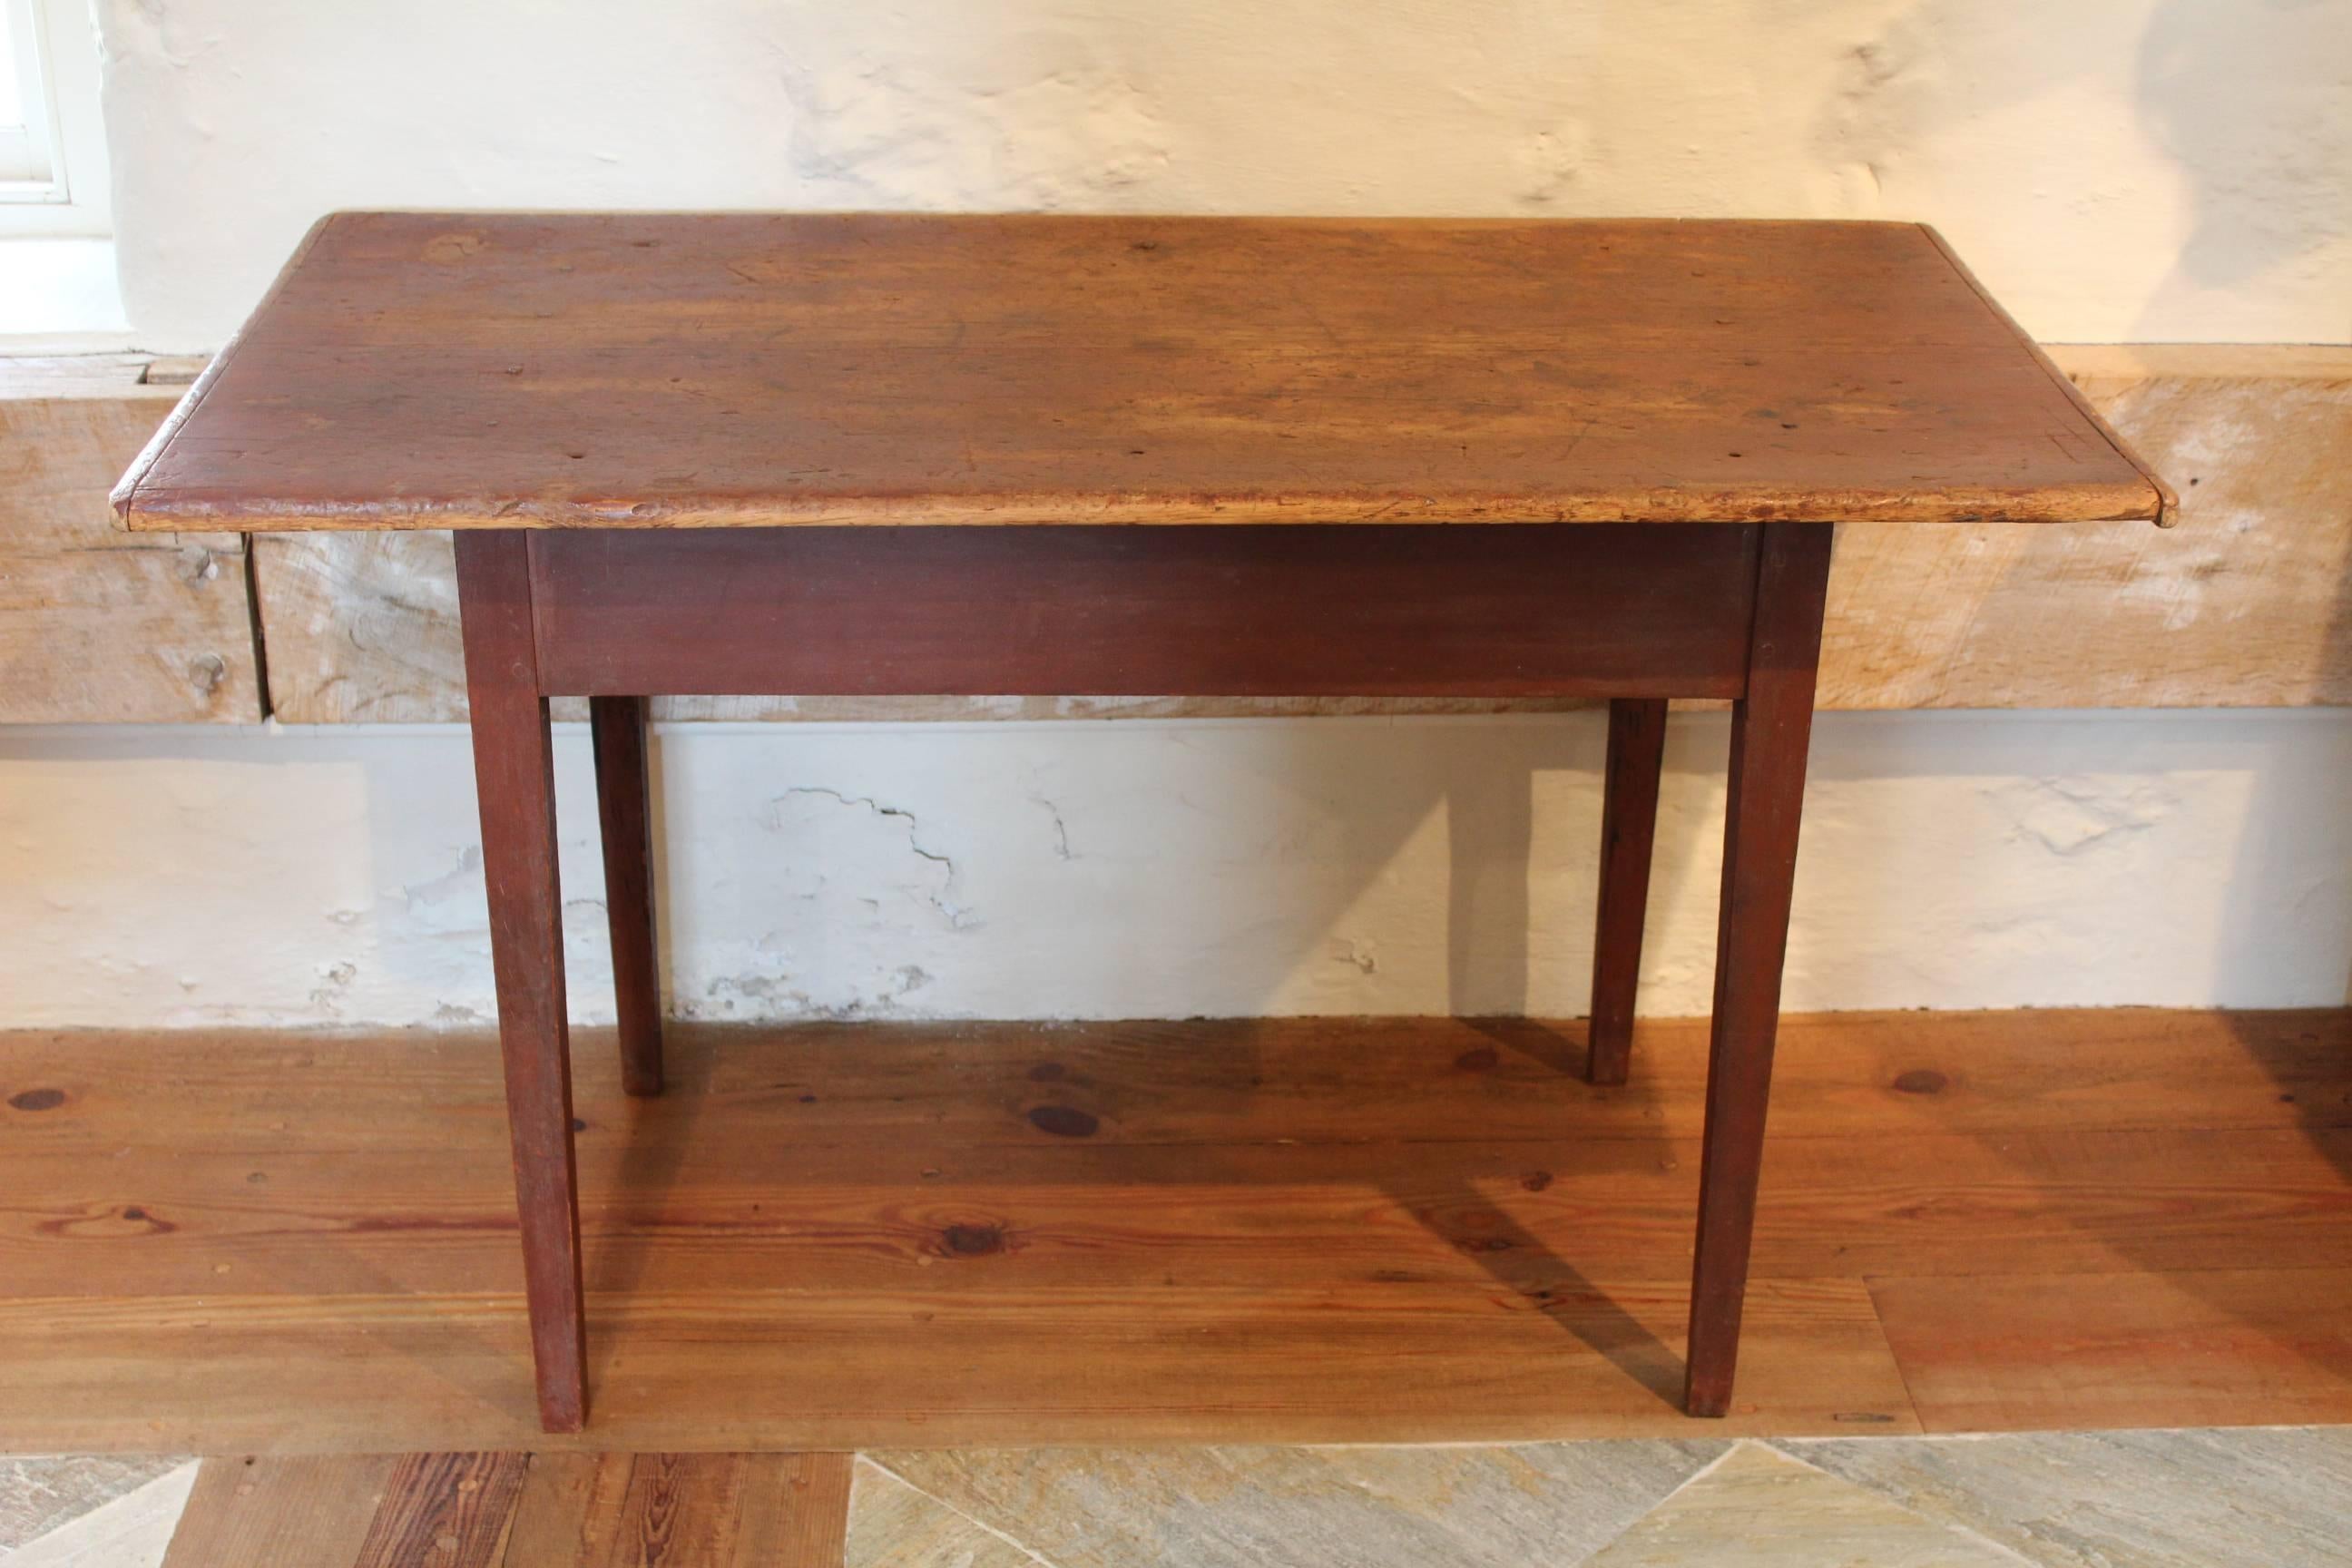 A New England cherrywood and pine tavern table retaining its original red-painted finish. This table features a single board top with bread board ends over tapered legs with pegged construction throughout. 

Measures: H. 28 3/4